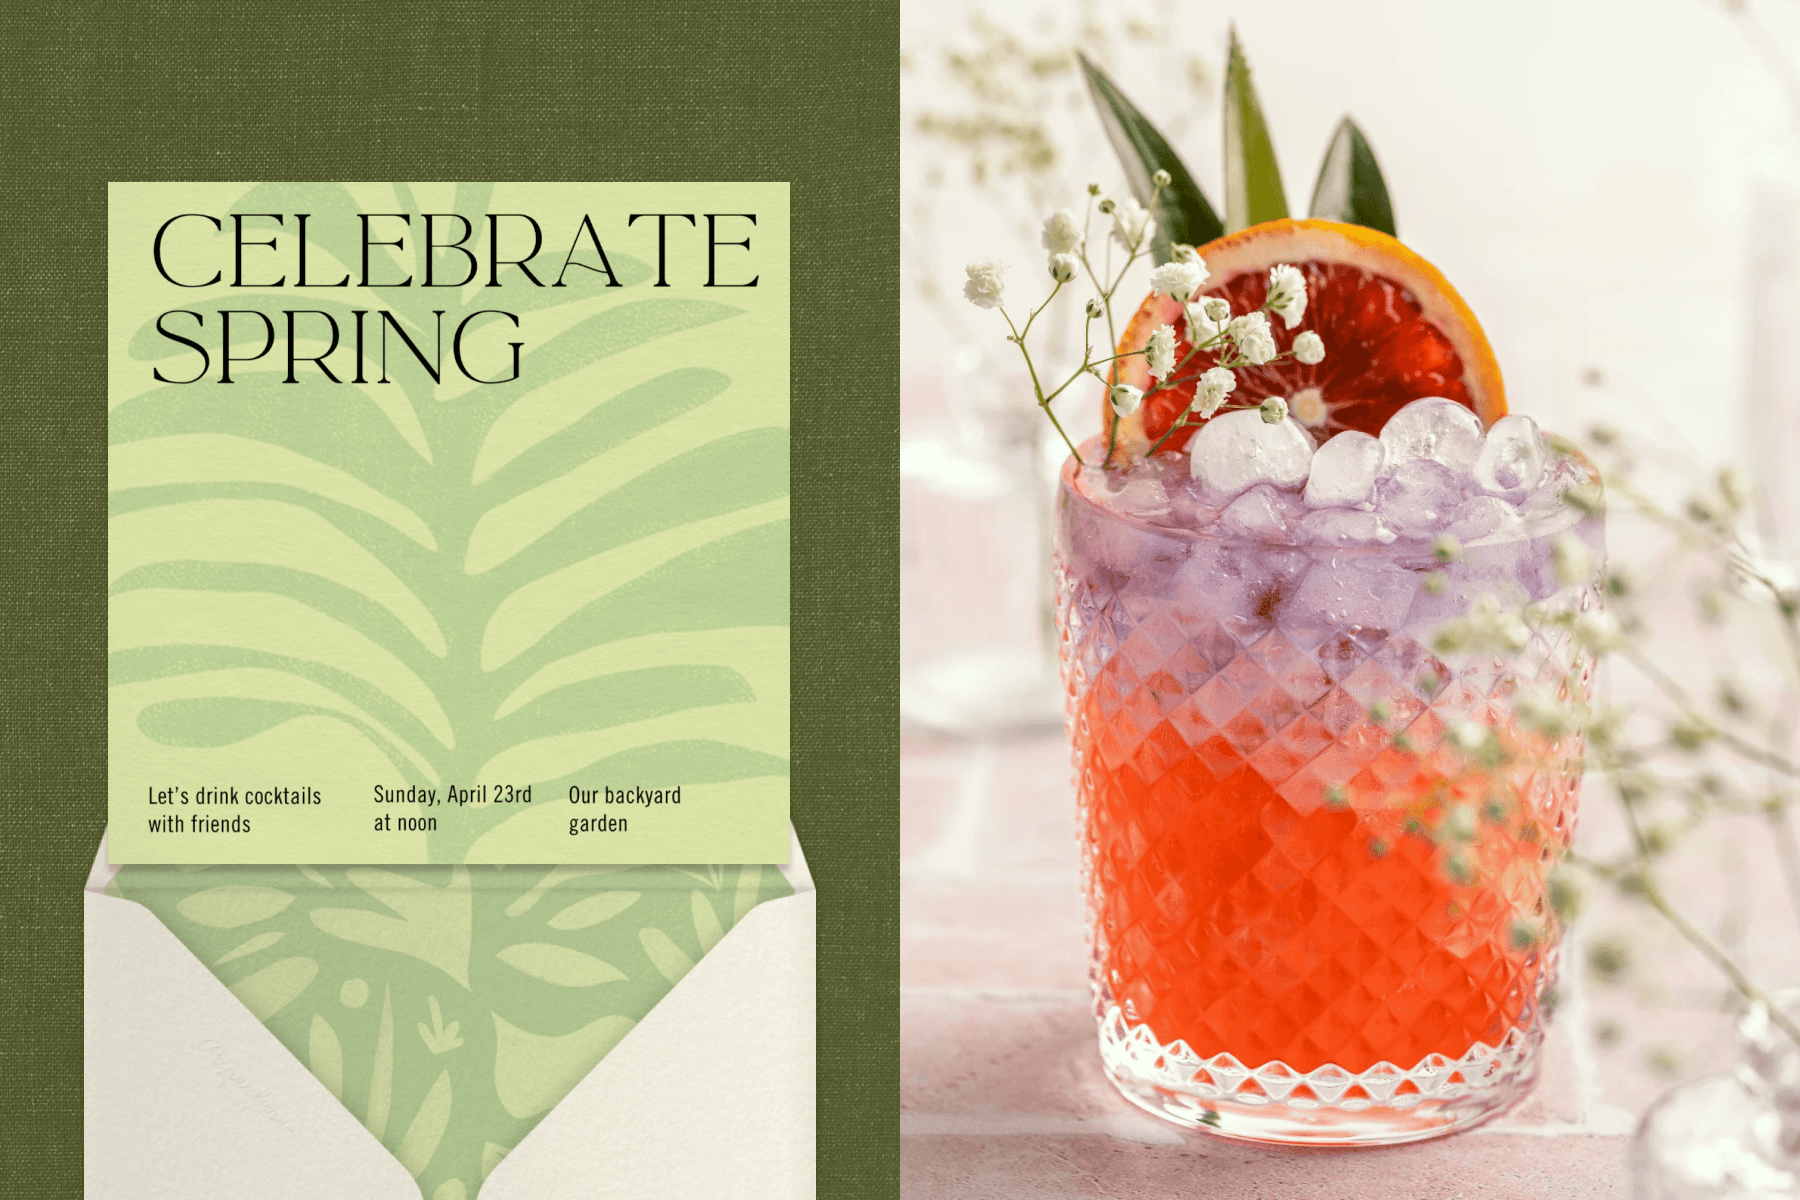 A square, light green invitation with a green plant shape reads ‘celebrate spring;’ an orange-red drink with purple ice and a blood orange garnish